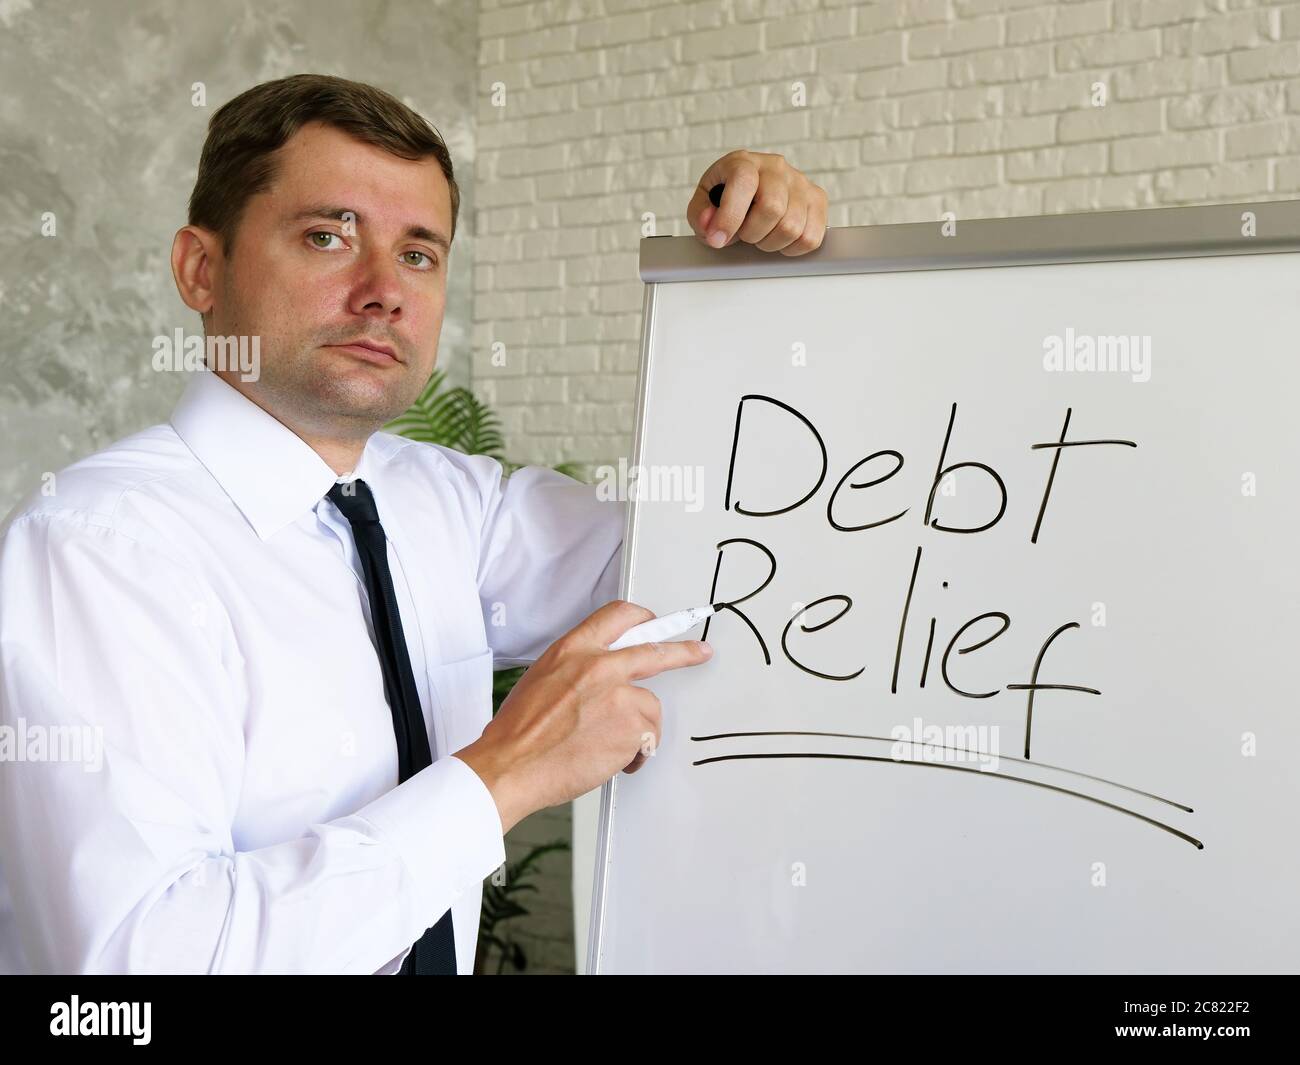 The manager talks about debt relief in a bank. Stock Photo